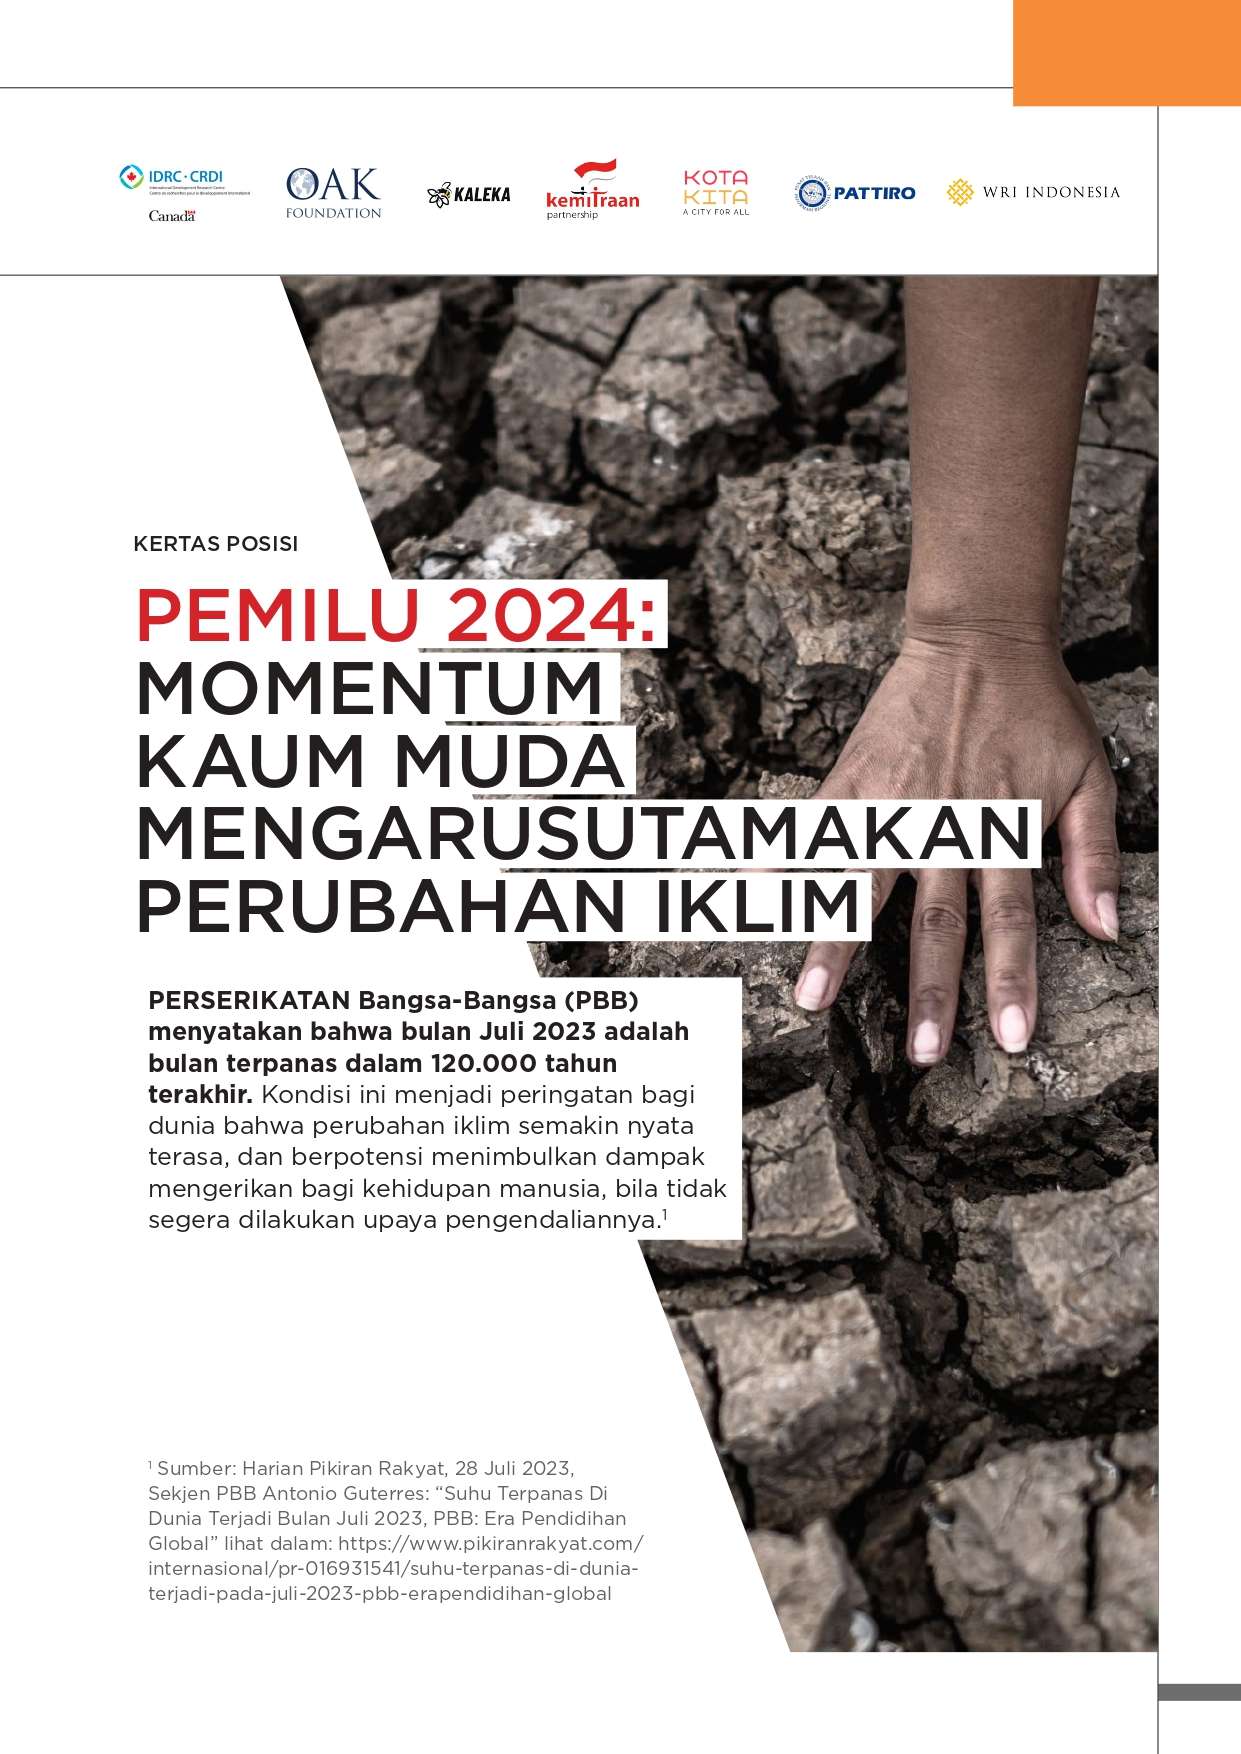 Collaborative Position Paper of Think Climate Indonesia Consortium: Momentum for Young People in Mainstreaming Climate Change Issues in the 2024 Election.